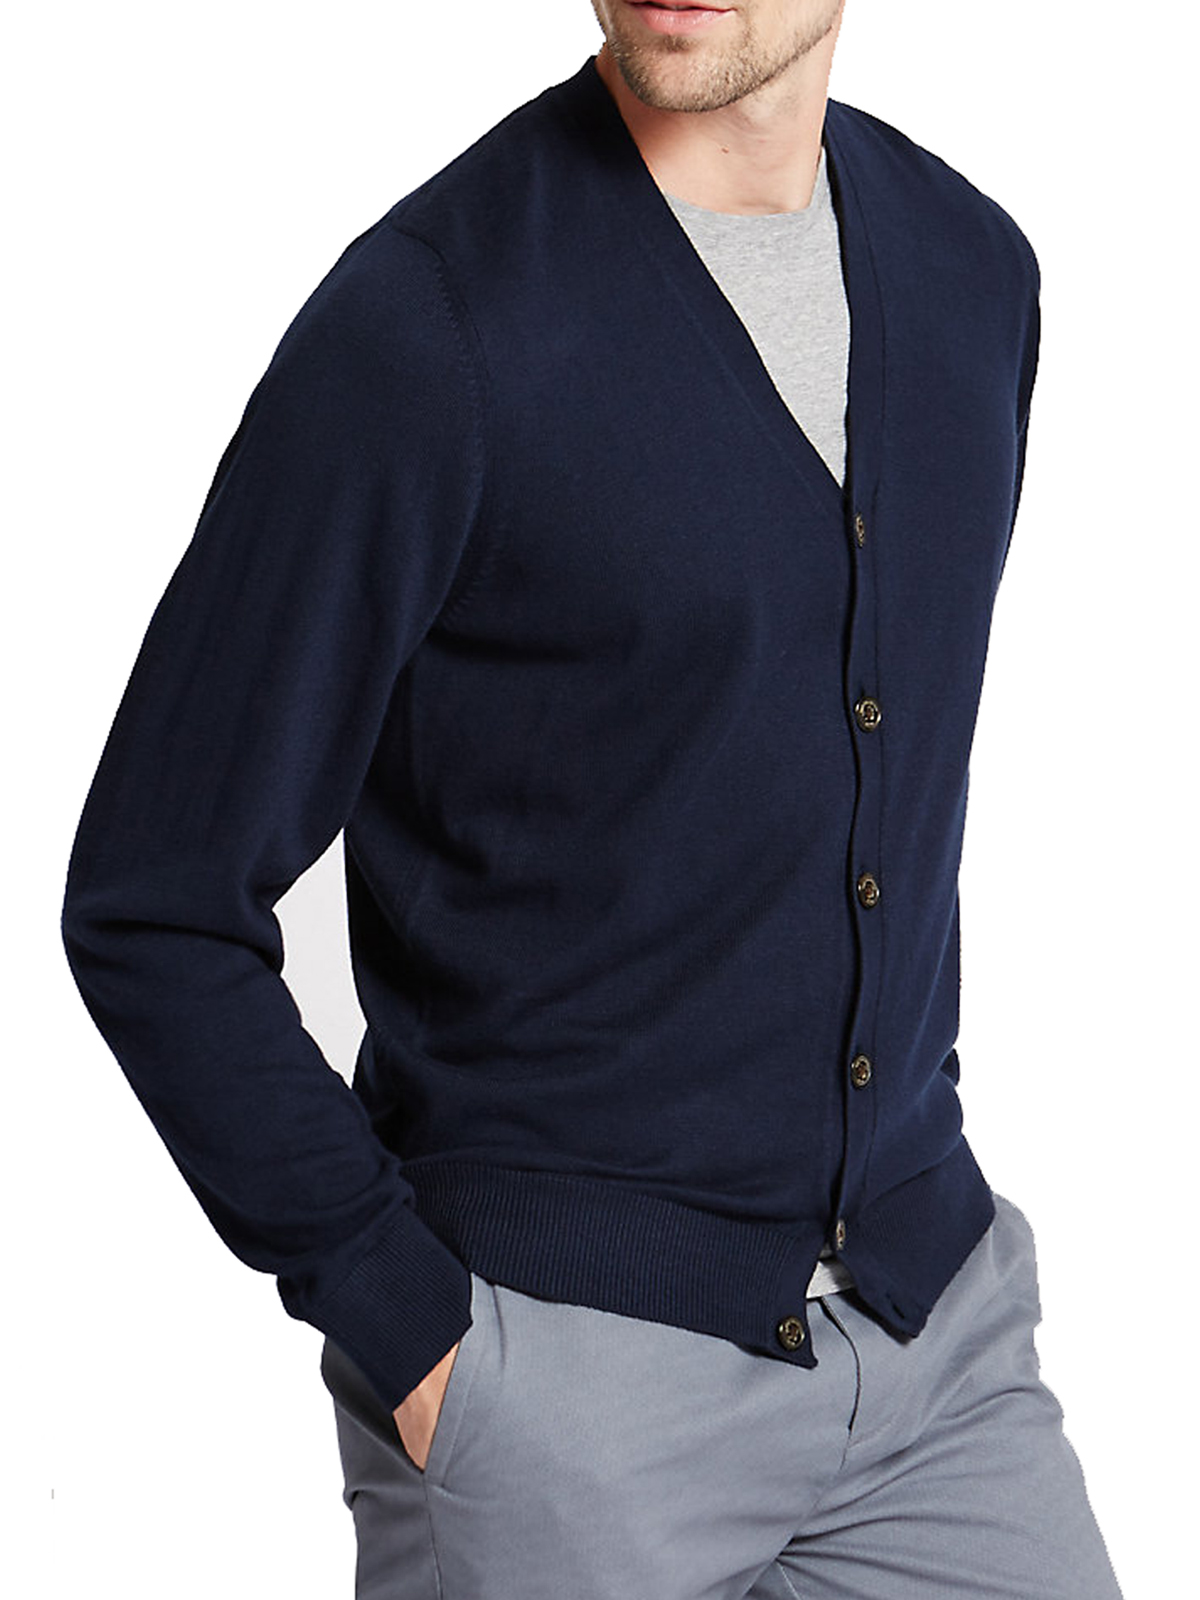 Marks and Spencer - - M&5 NAVY Cotton Blend Long Sleeve Cardigan - Size ...